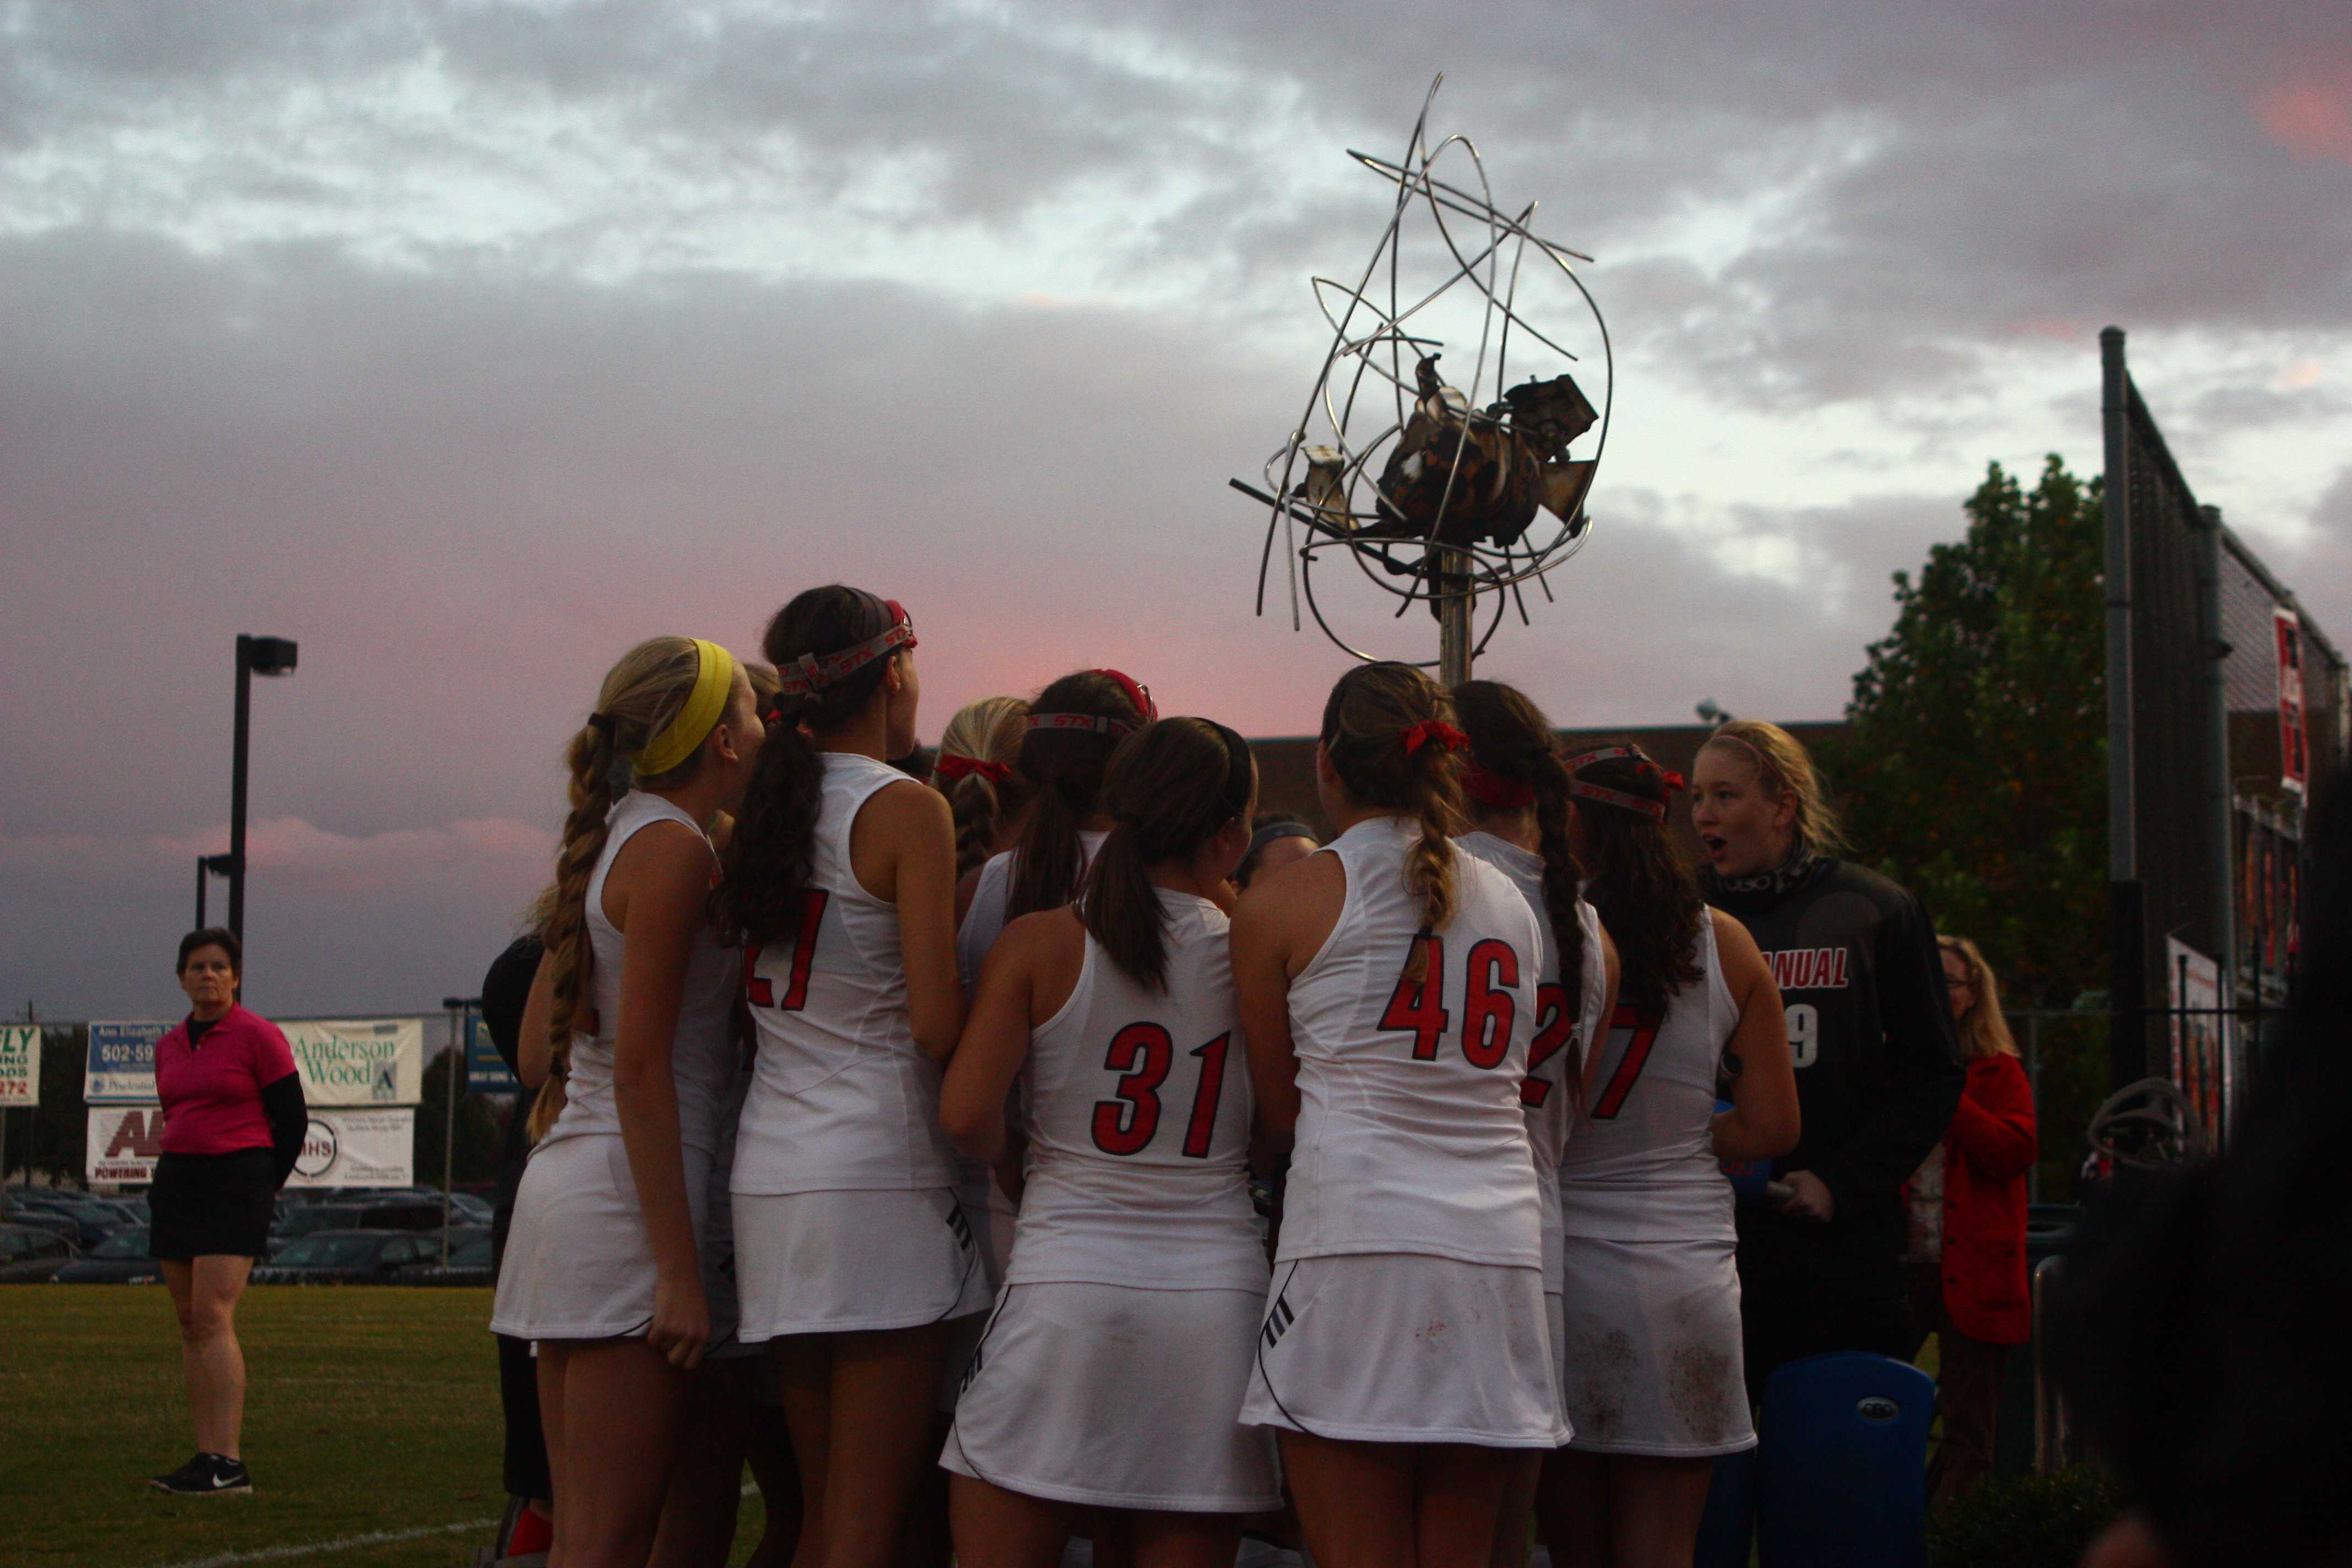 Before the game, Manual players sing the school fight song while huddled around a landmark sculpture